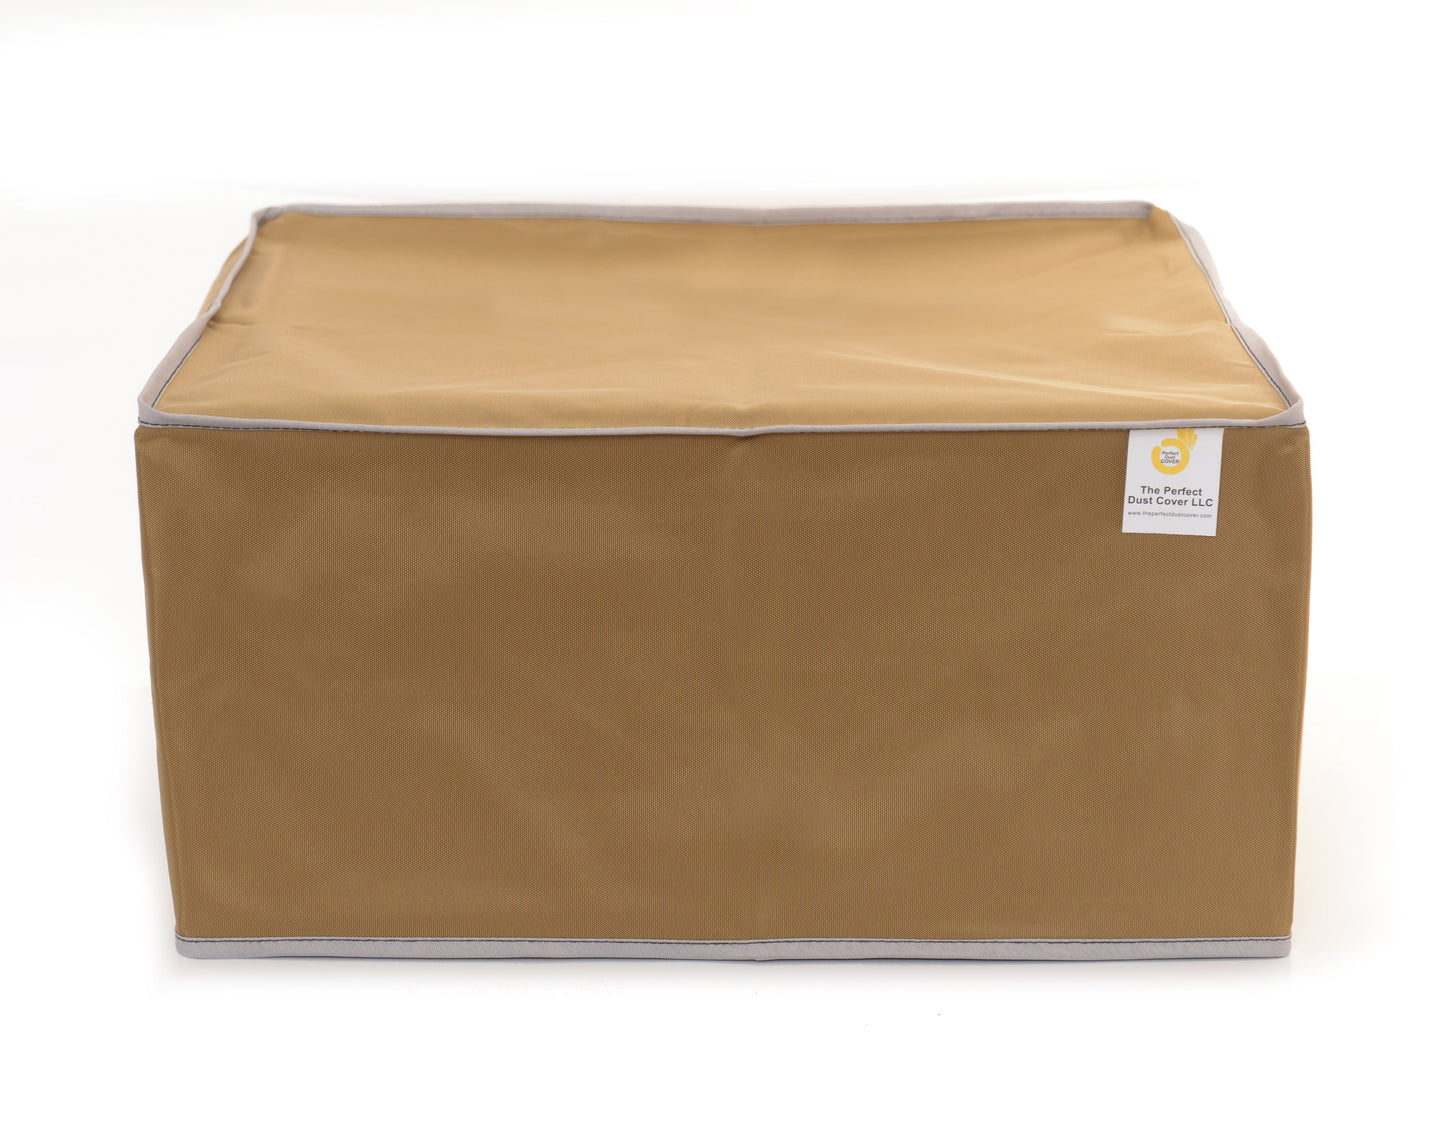 The Perfect Dust Cover, Tan Nylon Cover for HP OfficeJet Pro 8720 All-in-One Wireless Printer, Anti Static and Waterproof Cover Dimensions 19.7''W x 17.7''D x 13.5''H by The Perfect Dust Cover LLC